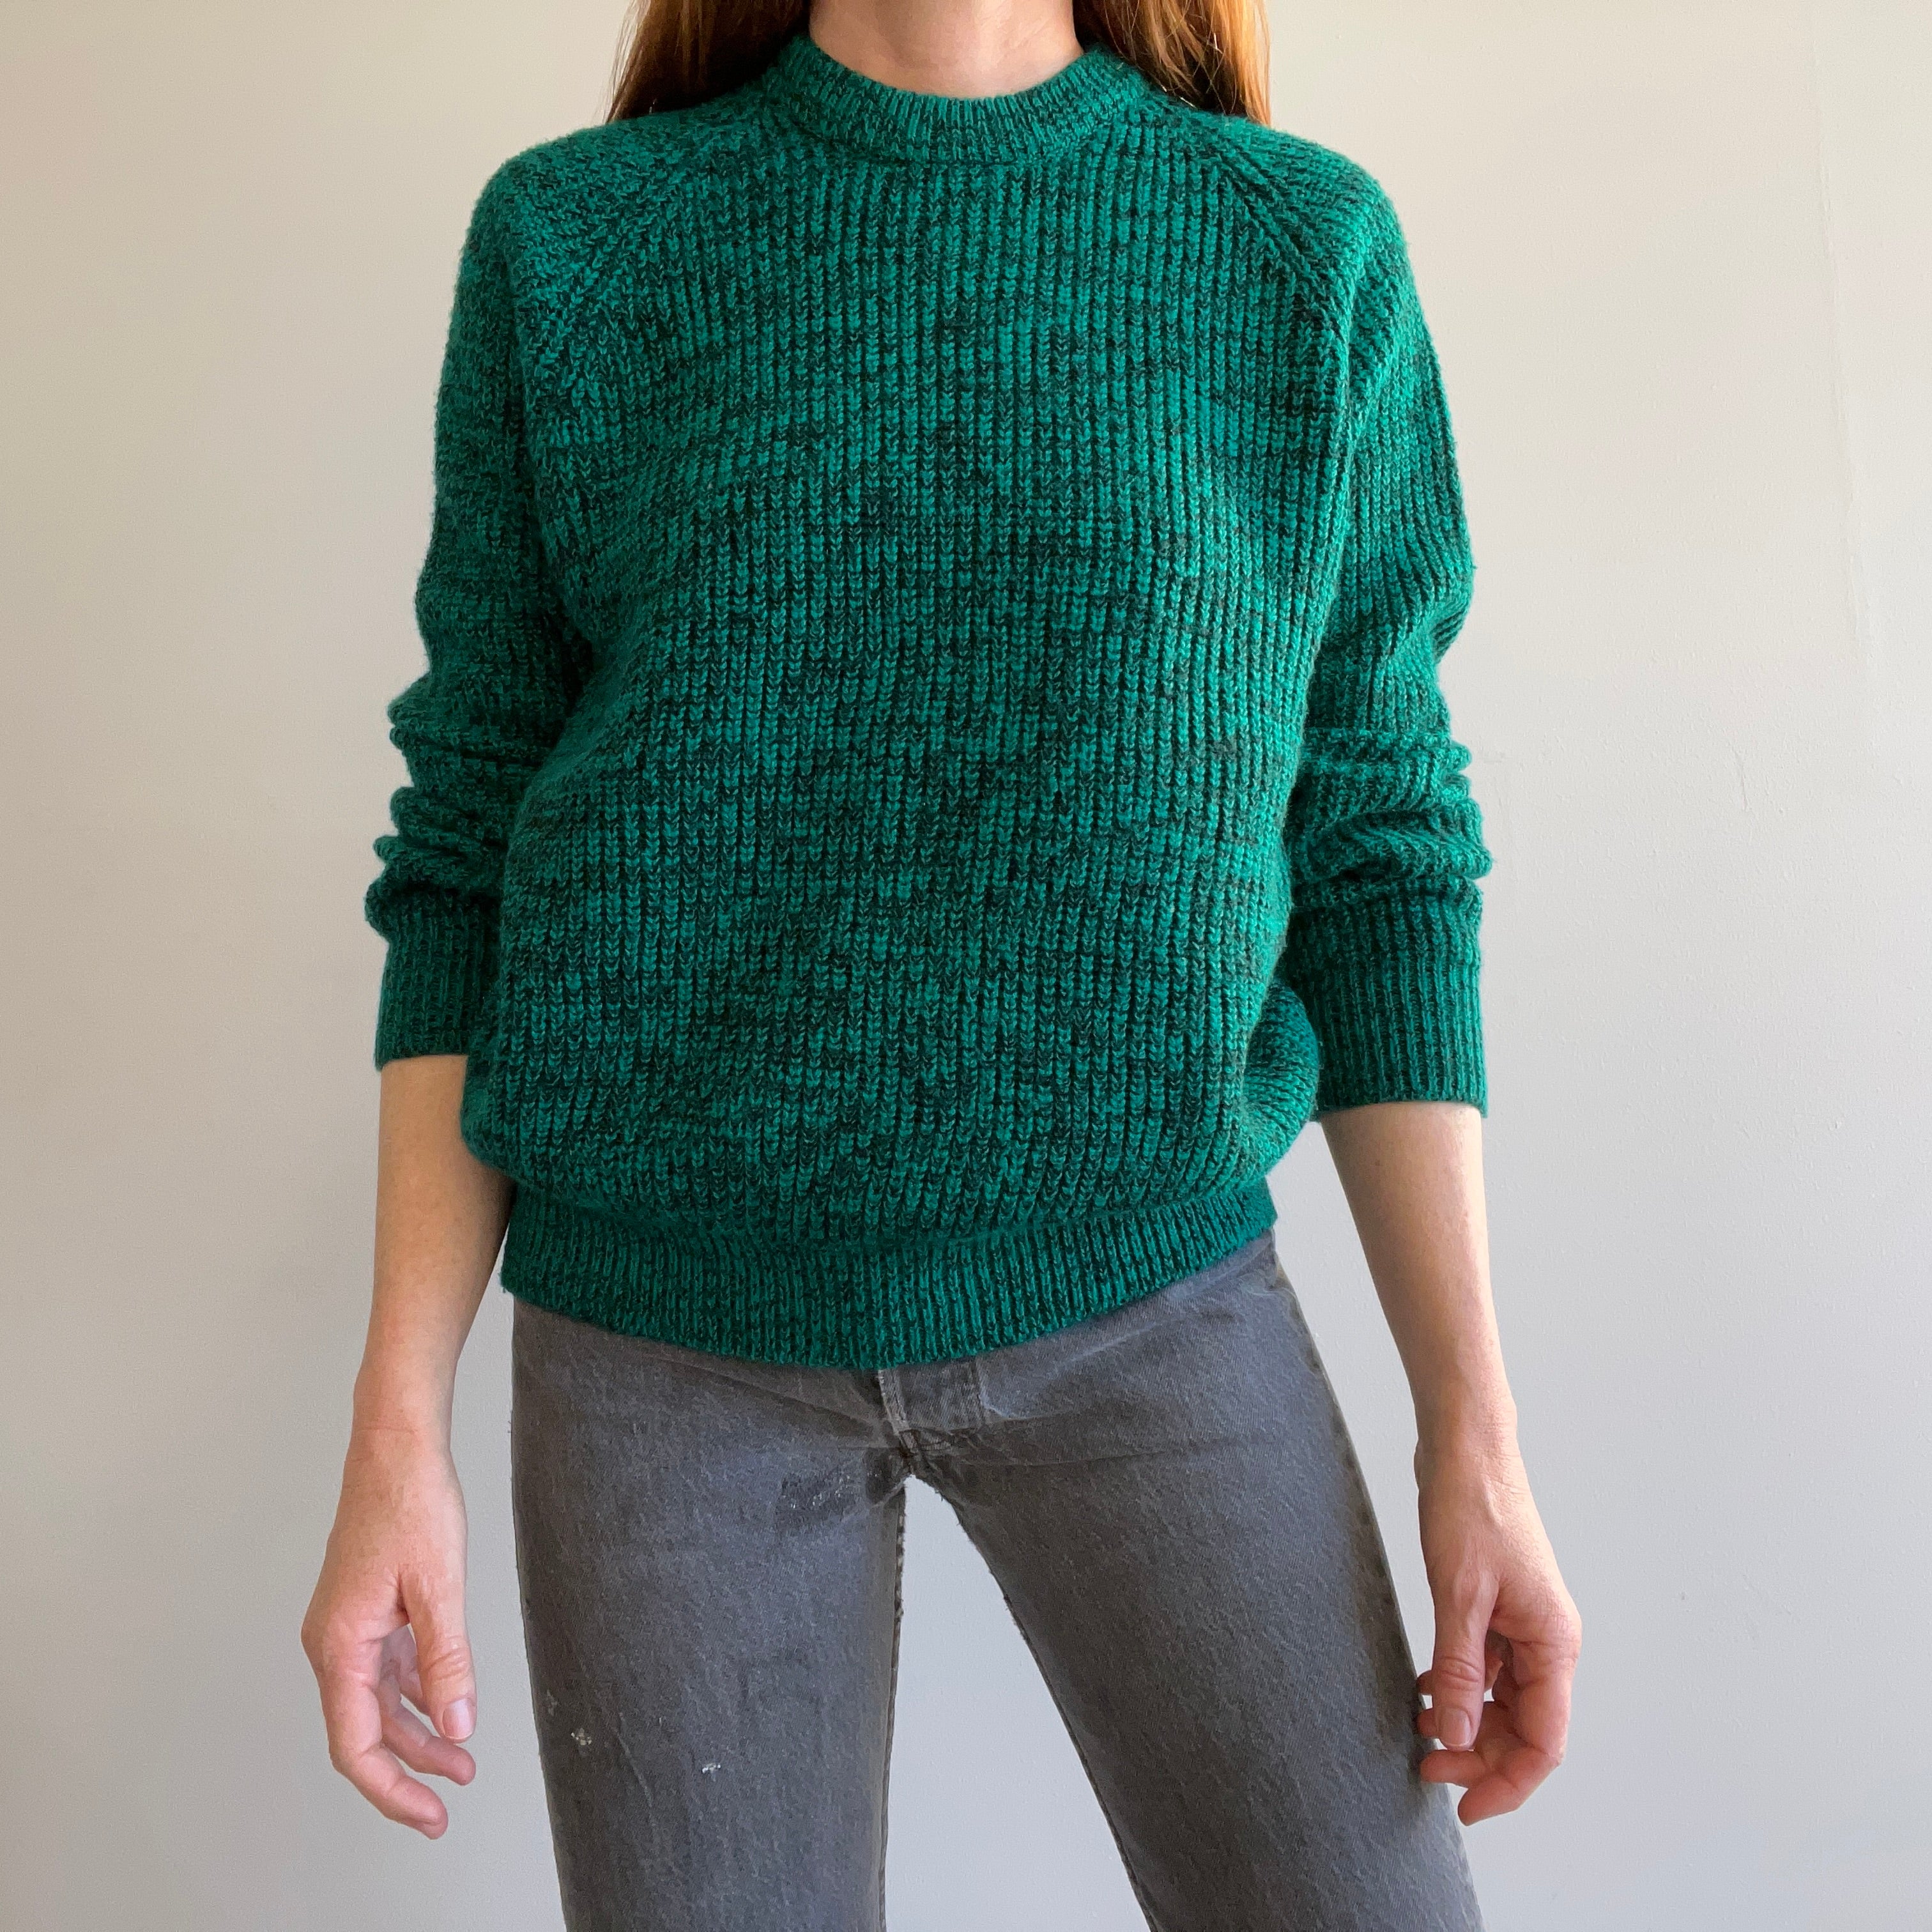 1980/90s St. John's Bay Green and Black Ribbed Sweater